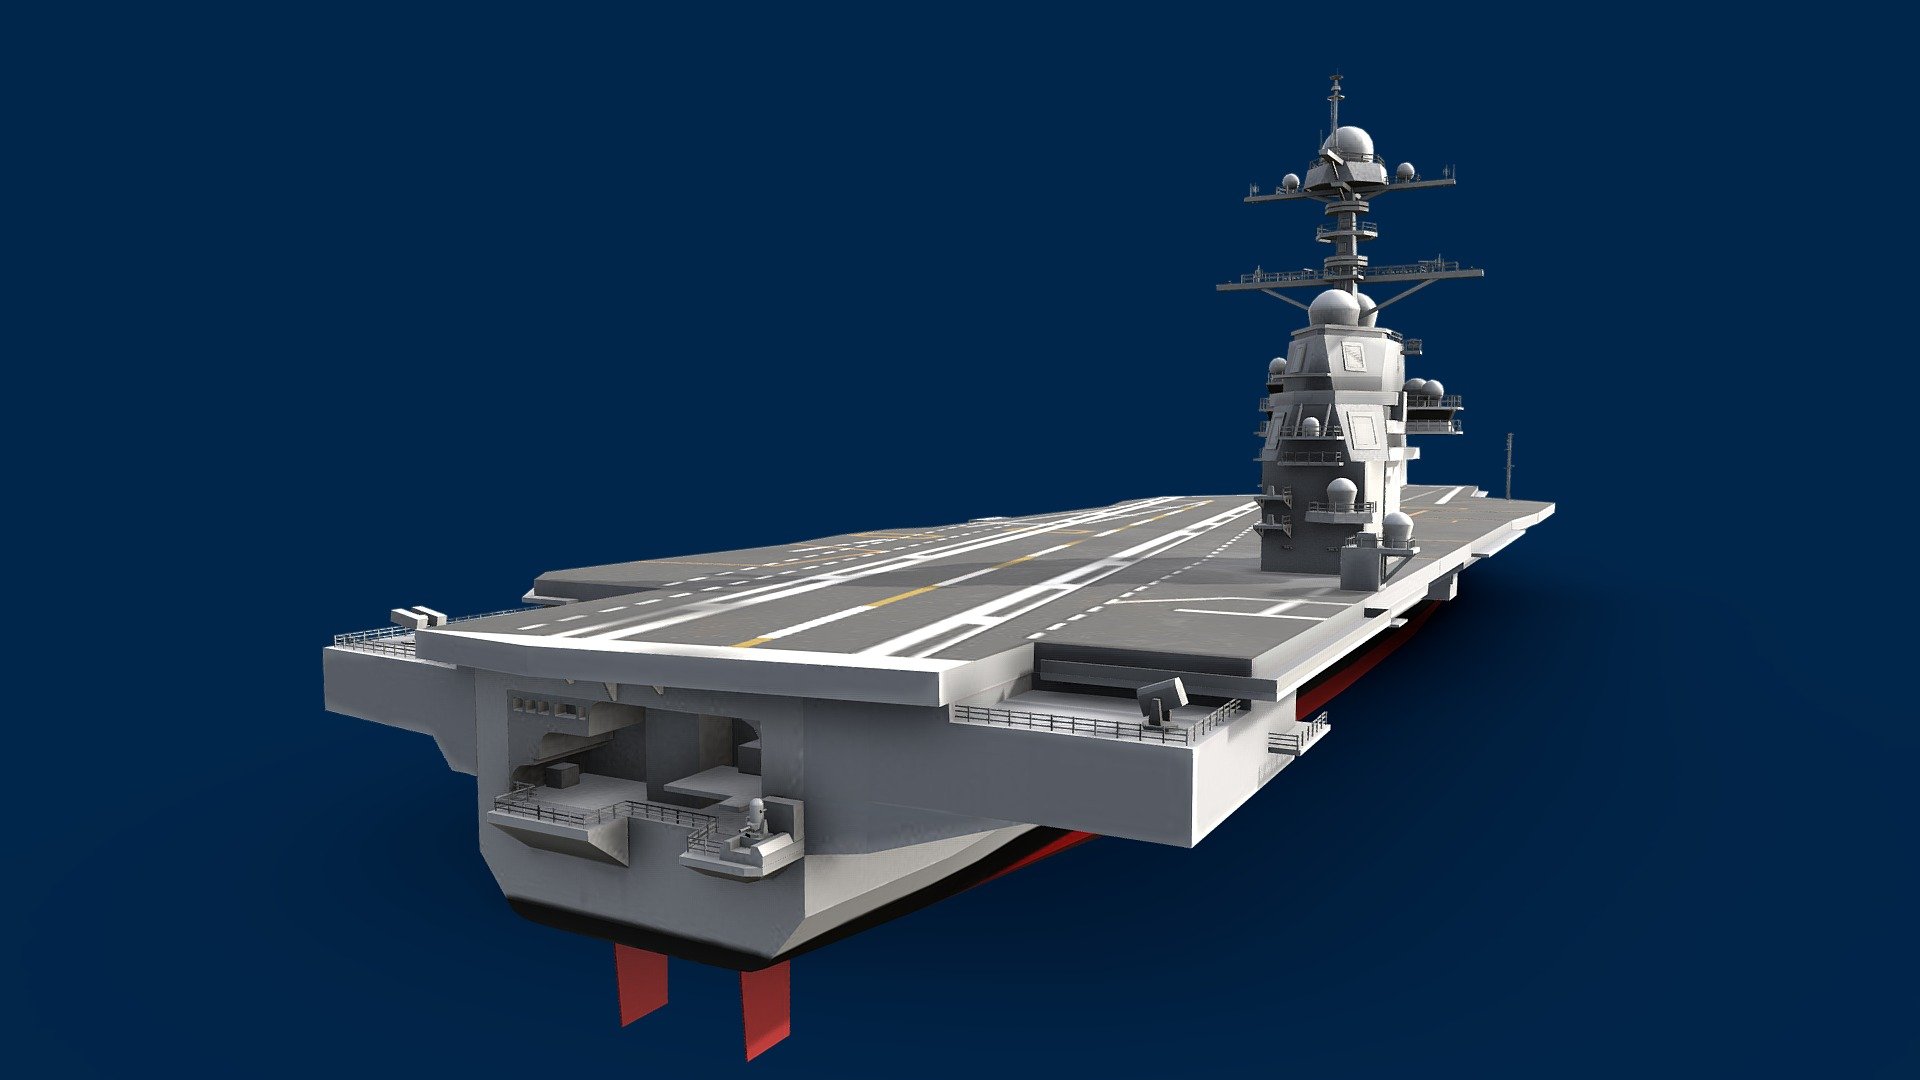 Gerald R. Ford aircraft carrier

The Gerald R. Ford class is a class of nuclear powered aircraft carriers currently being constructed for the United States Navy.

If you like this 3d model, please like, comment and follow me 3d model